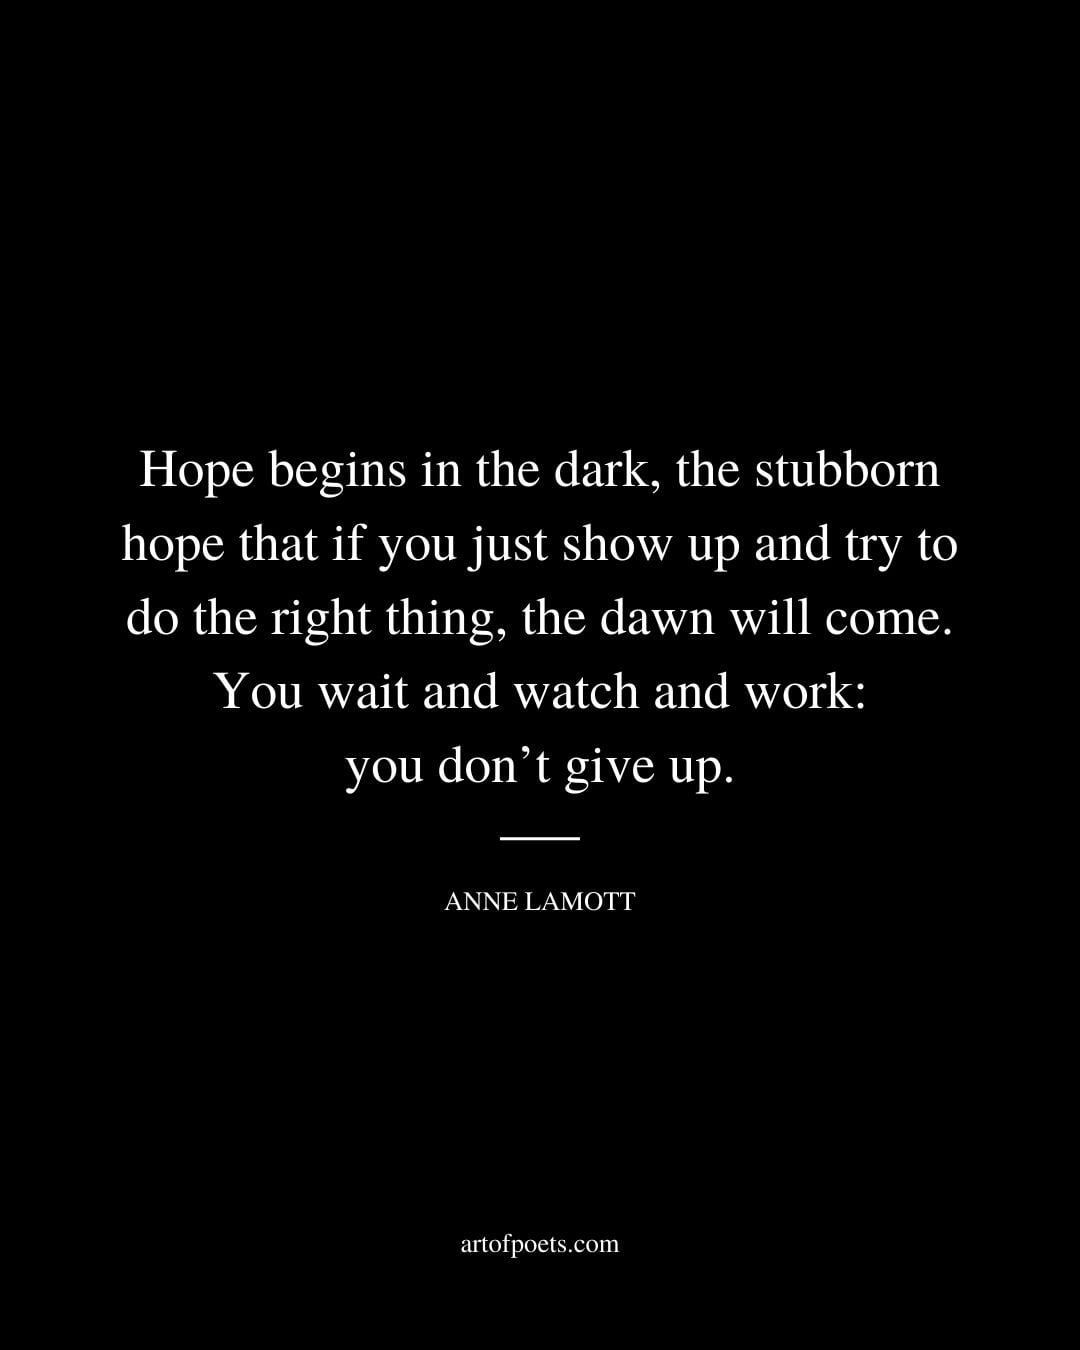 Hope begins in the dark the stubborn hope that if you just show up and try to do the right thing the dawn will come. You wait and watch and work you dont give up. Anne Lamott